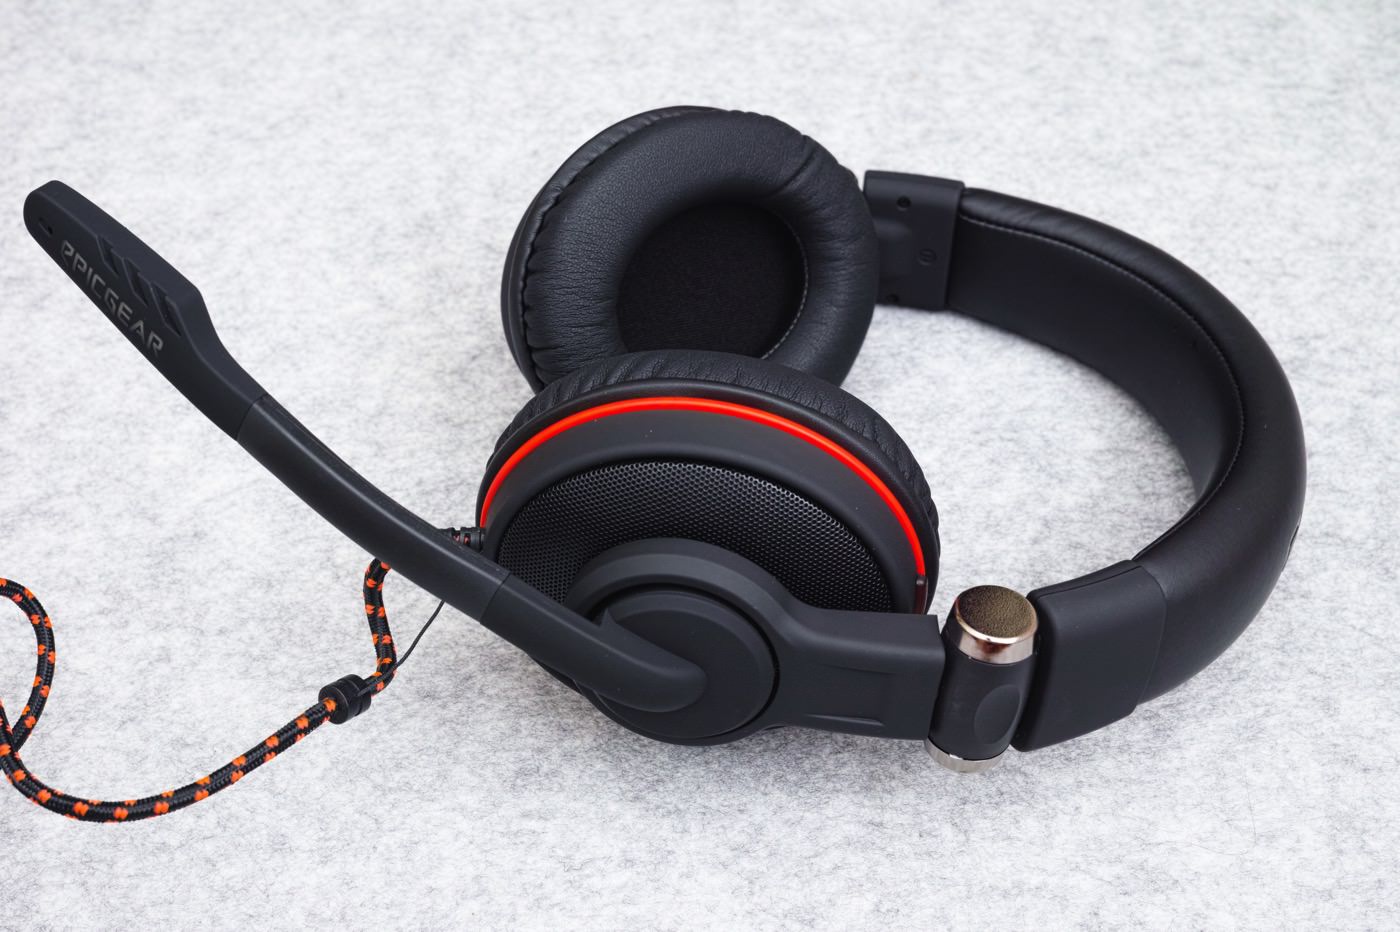 Epicgear sonorouz x gaming headset review 00011